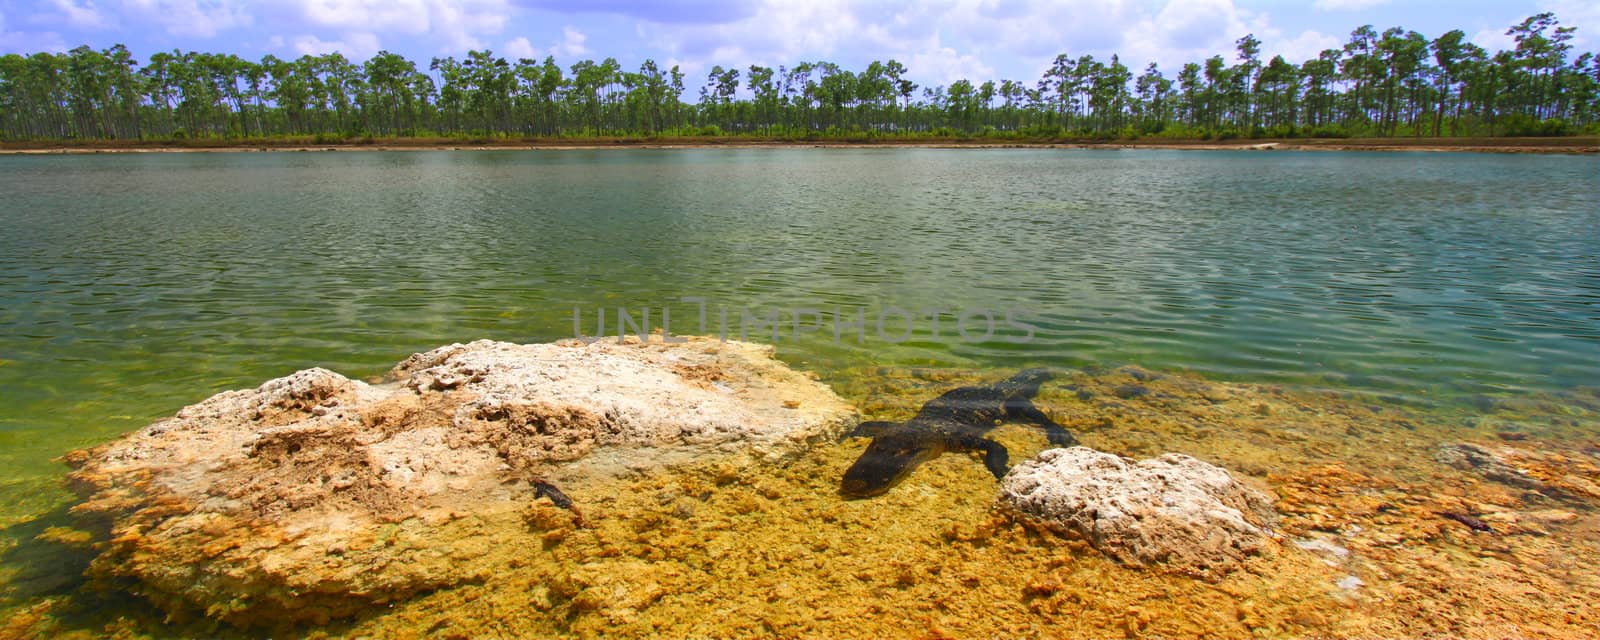 An American alligator rests in a clear pond at the Everglades National Park - Florida.